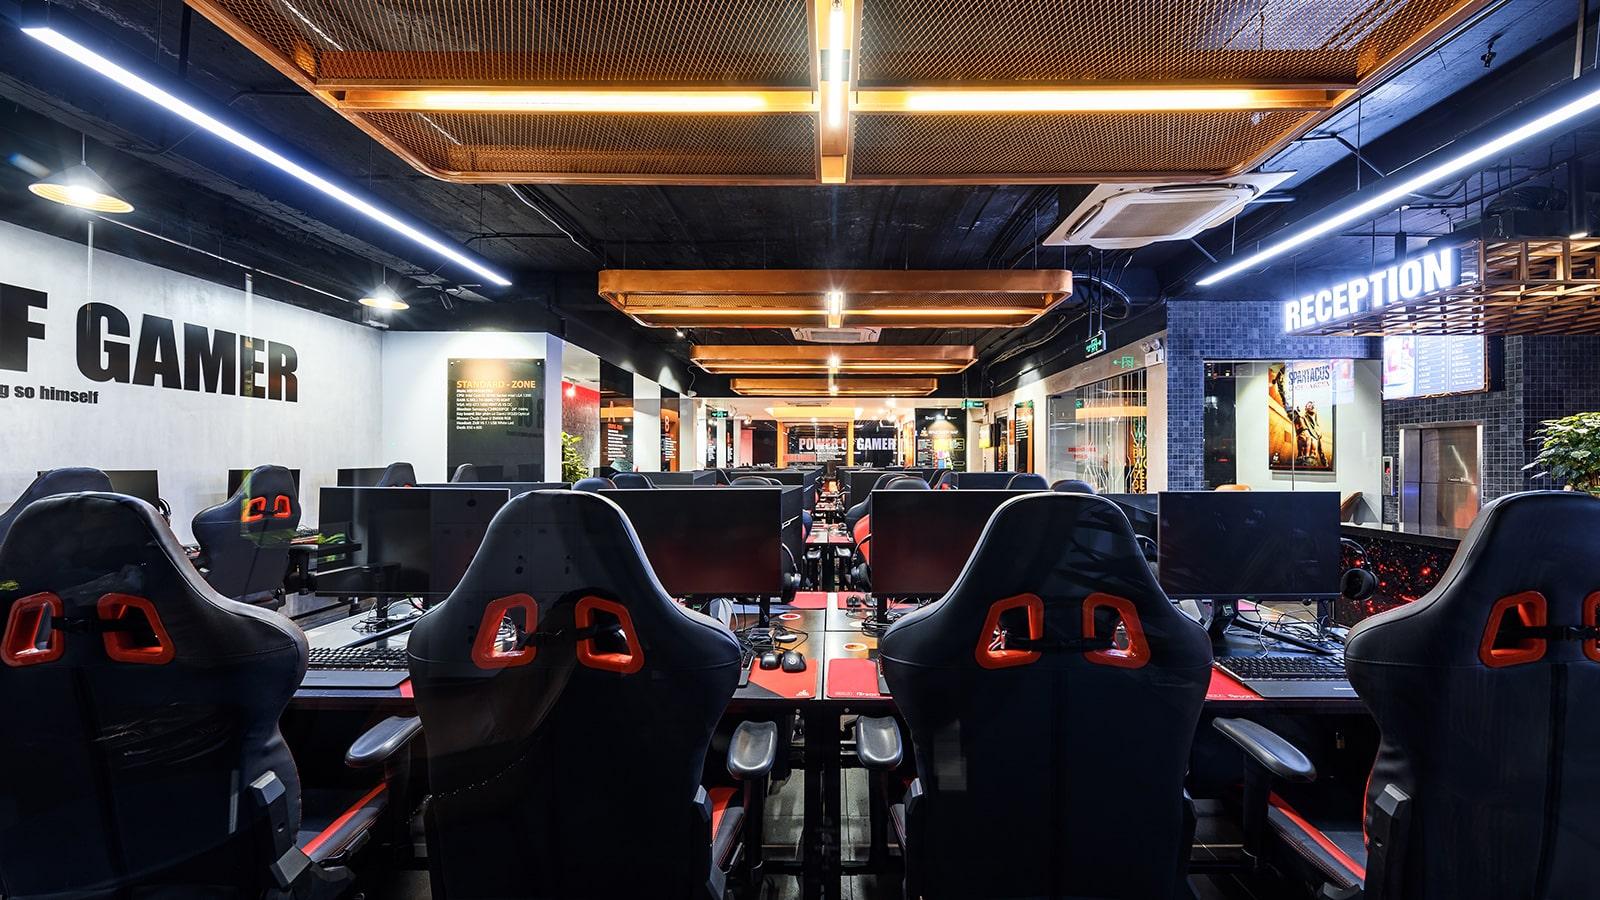 spartacus gaming center - Cyber game